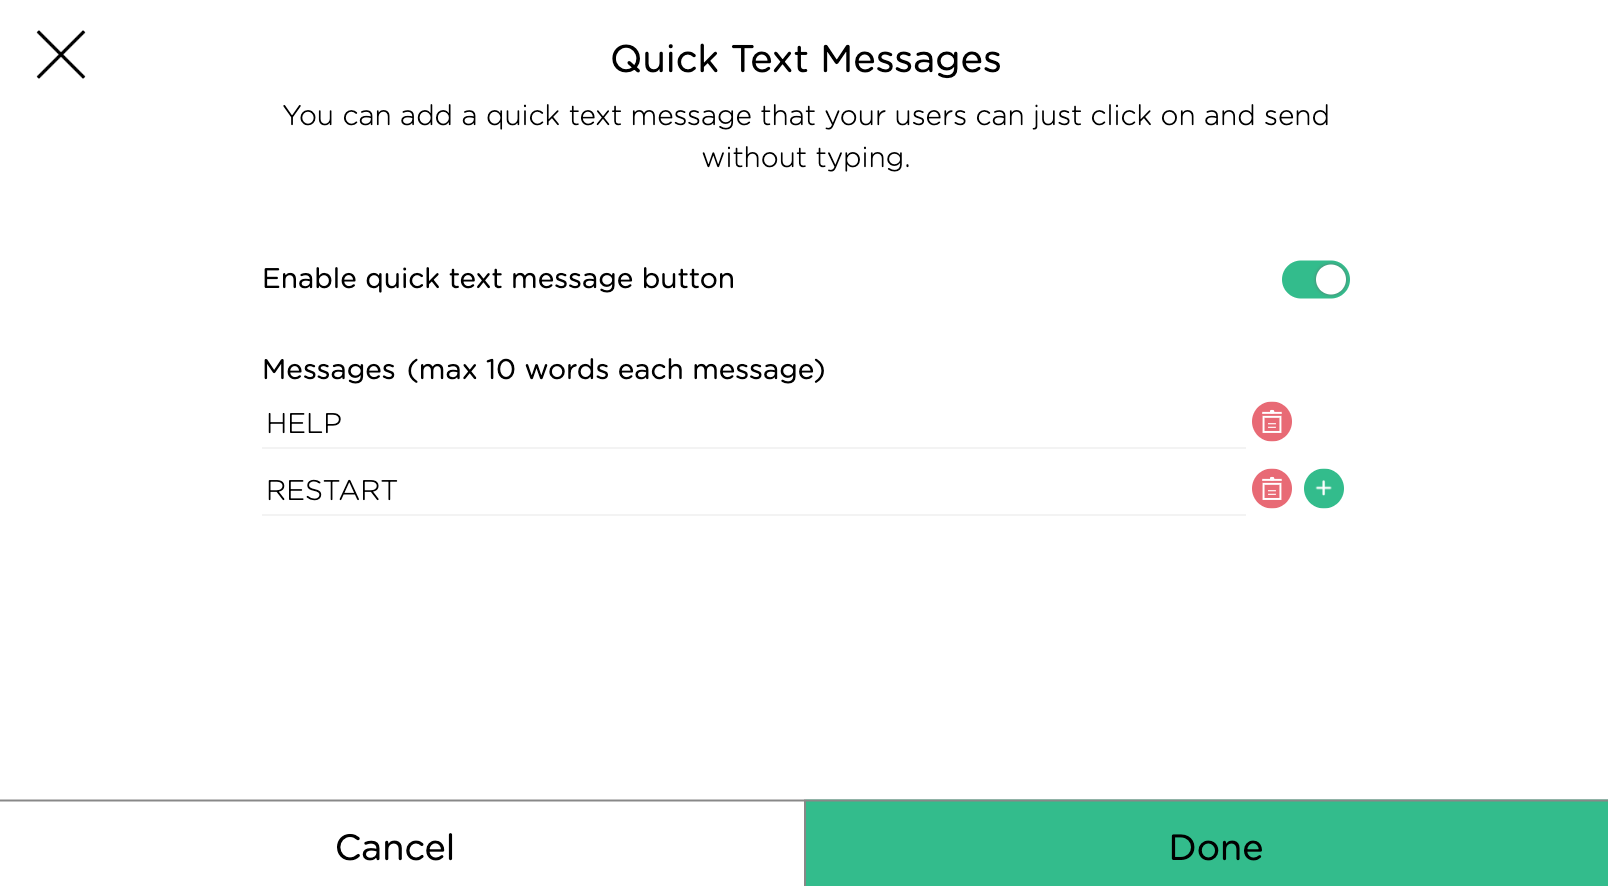 define up to 3 quick reply messages per topic. Here two quick text messages are defined: HELP and RESTART